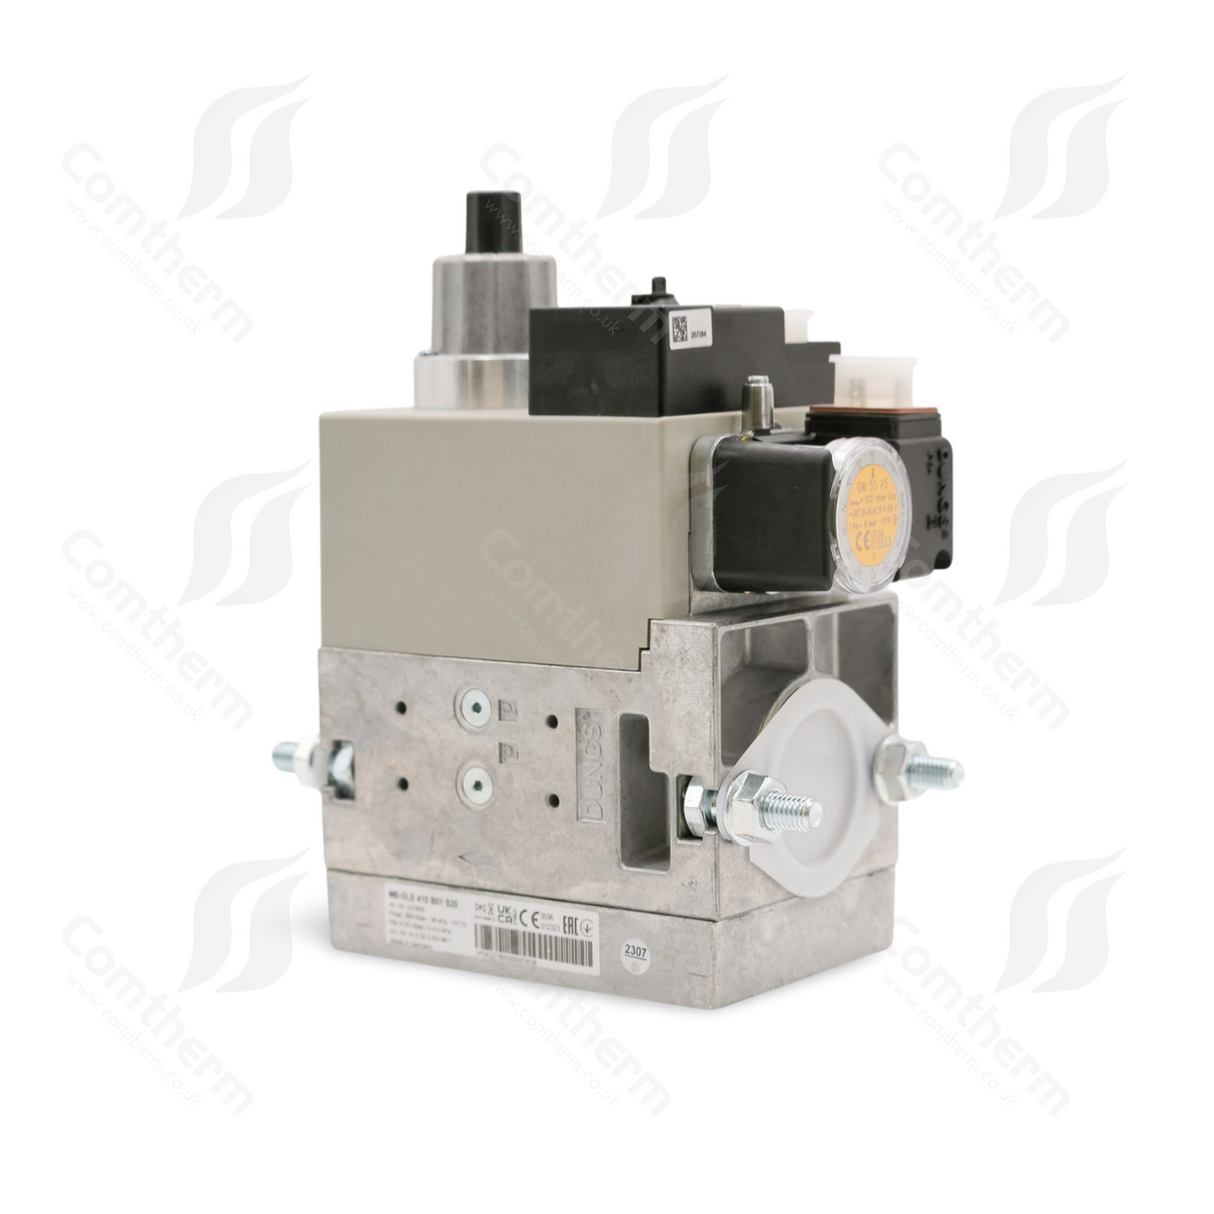 Dungs MB-DLE 410 B01 S22 + GW150A5 Multibloc Gas Valve - 110v